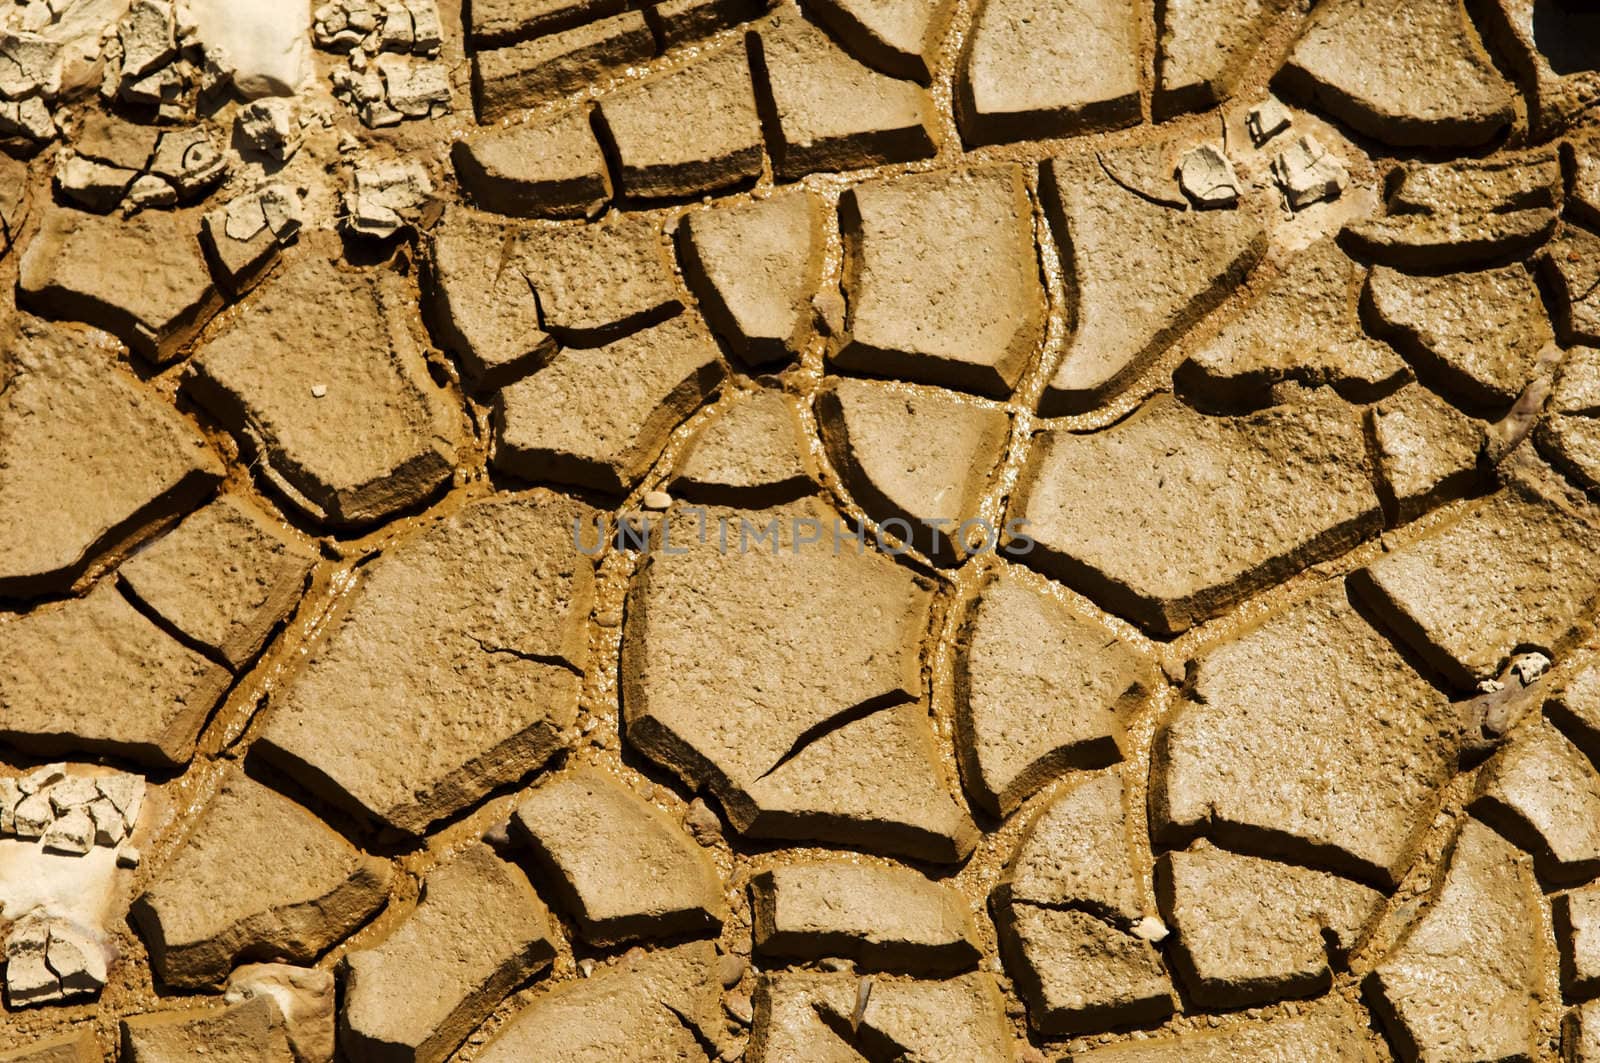 Dried soil cracking under the scorching sun